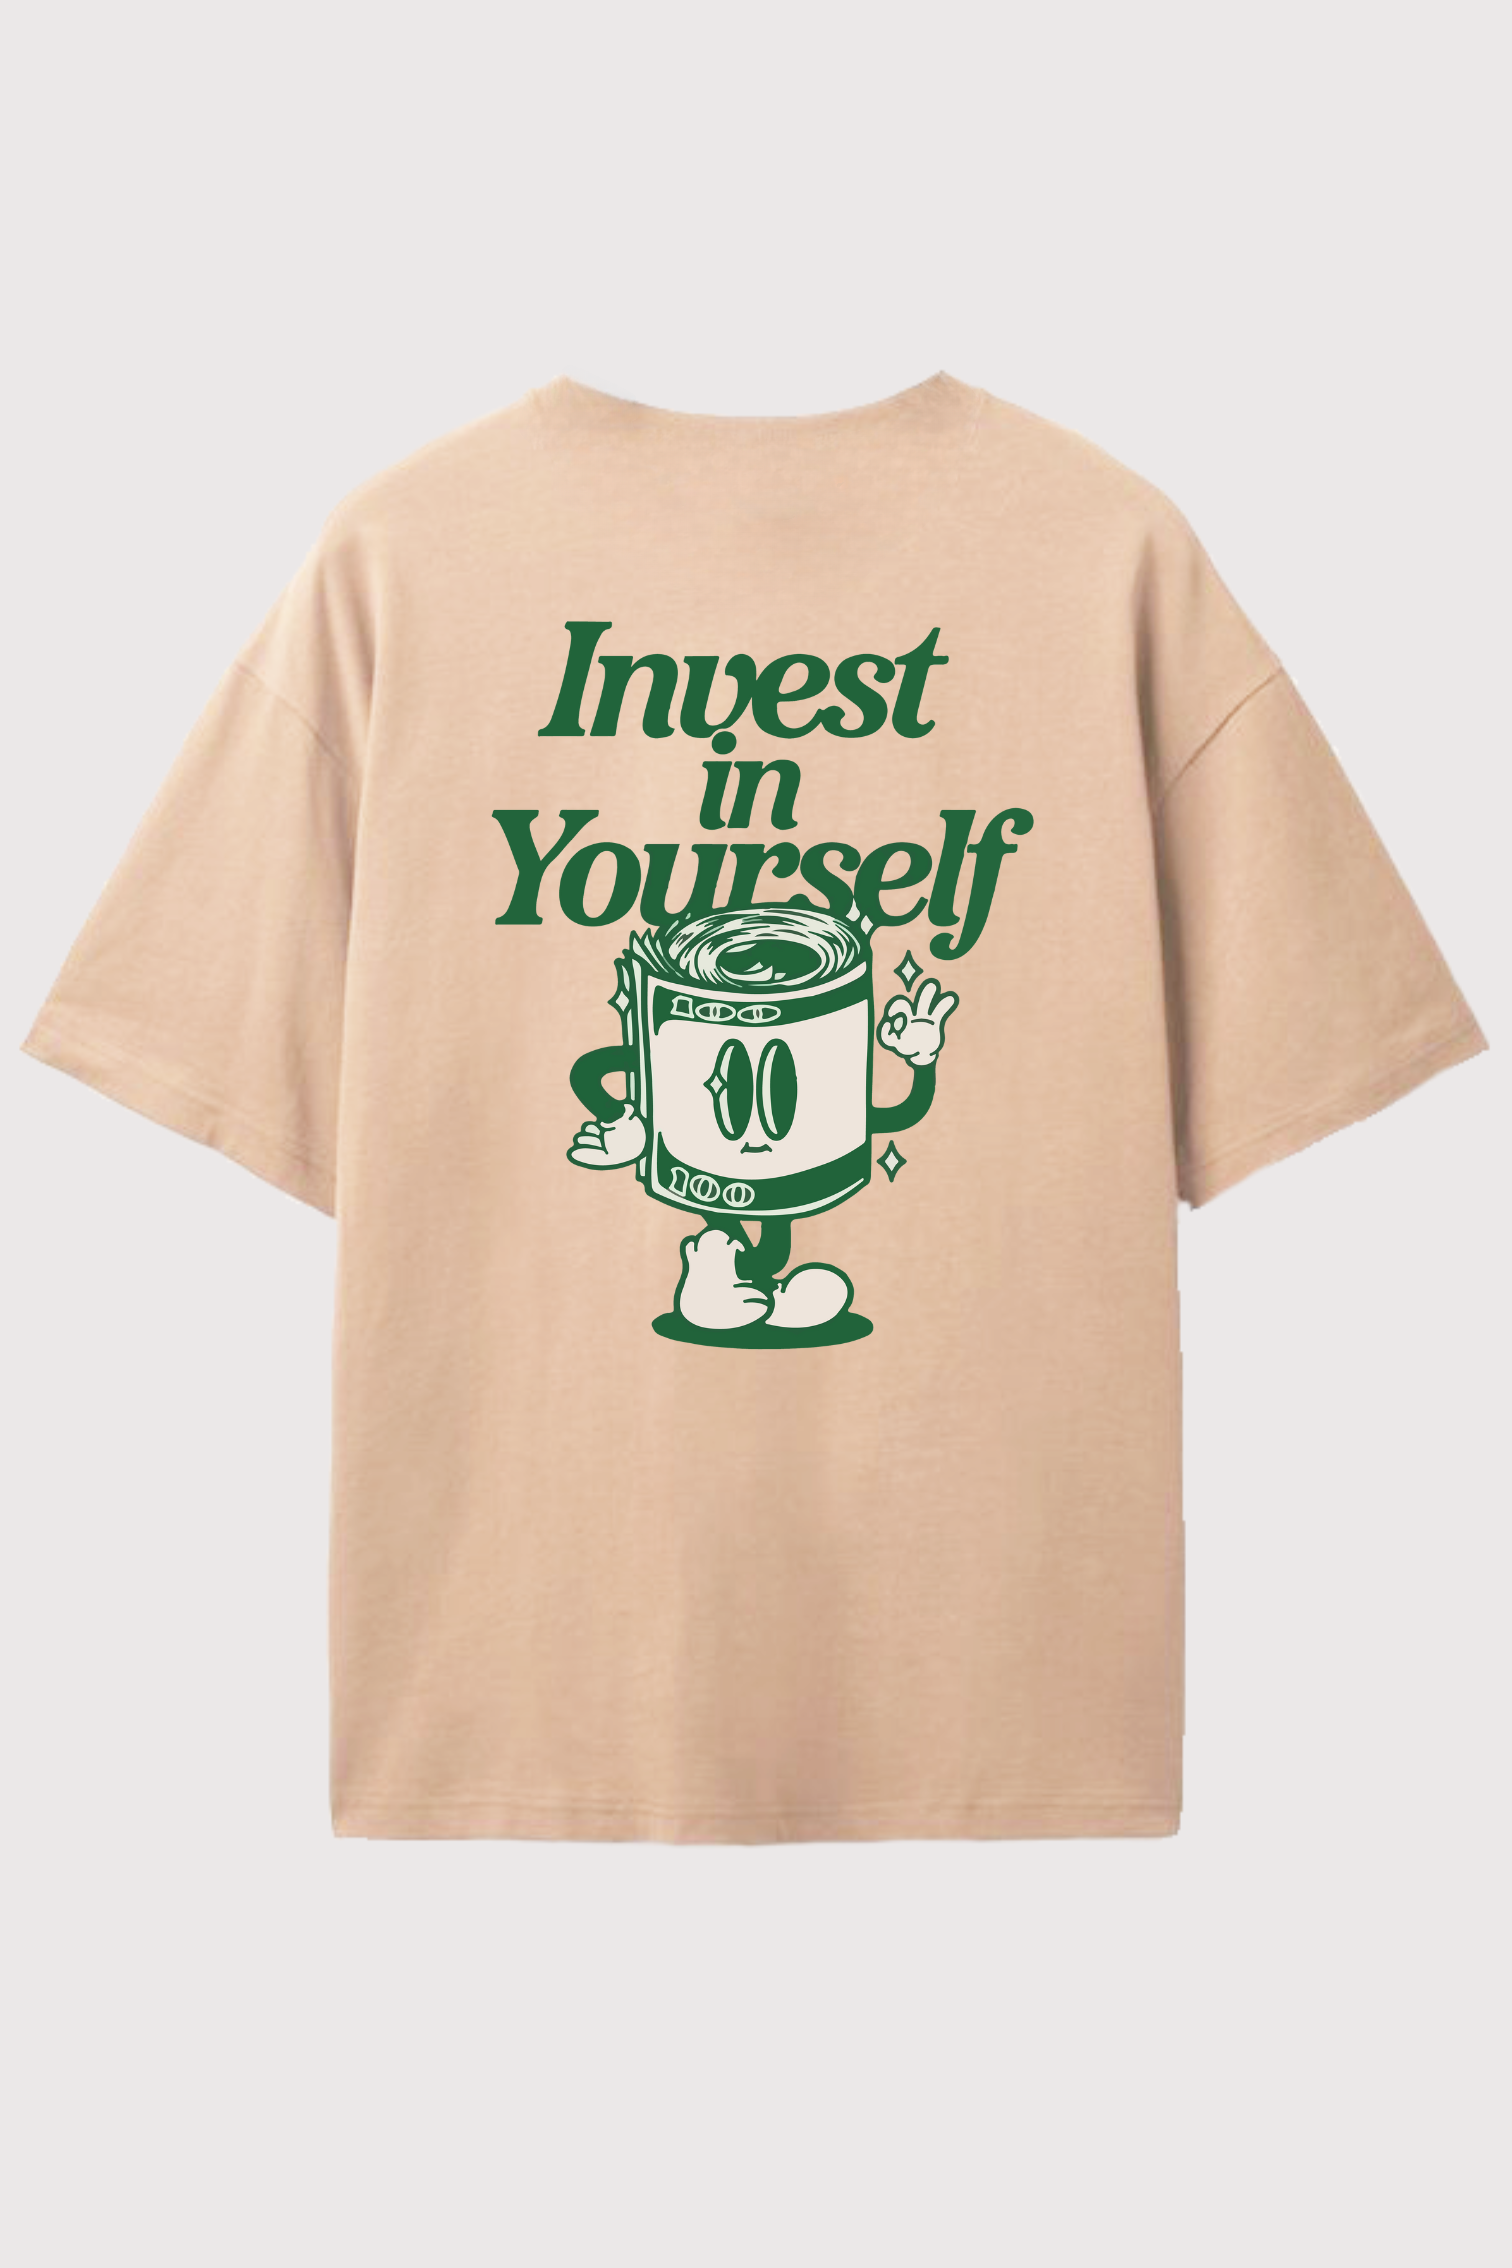 Invest in Yourself- Oversized t-shirt